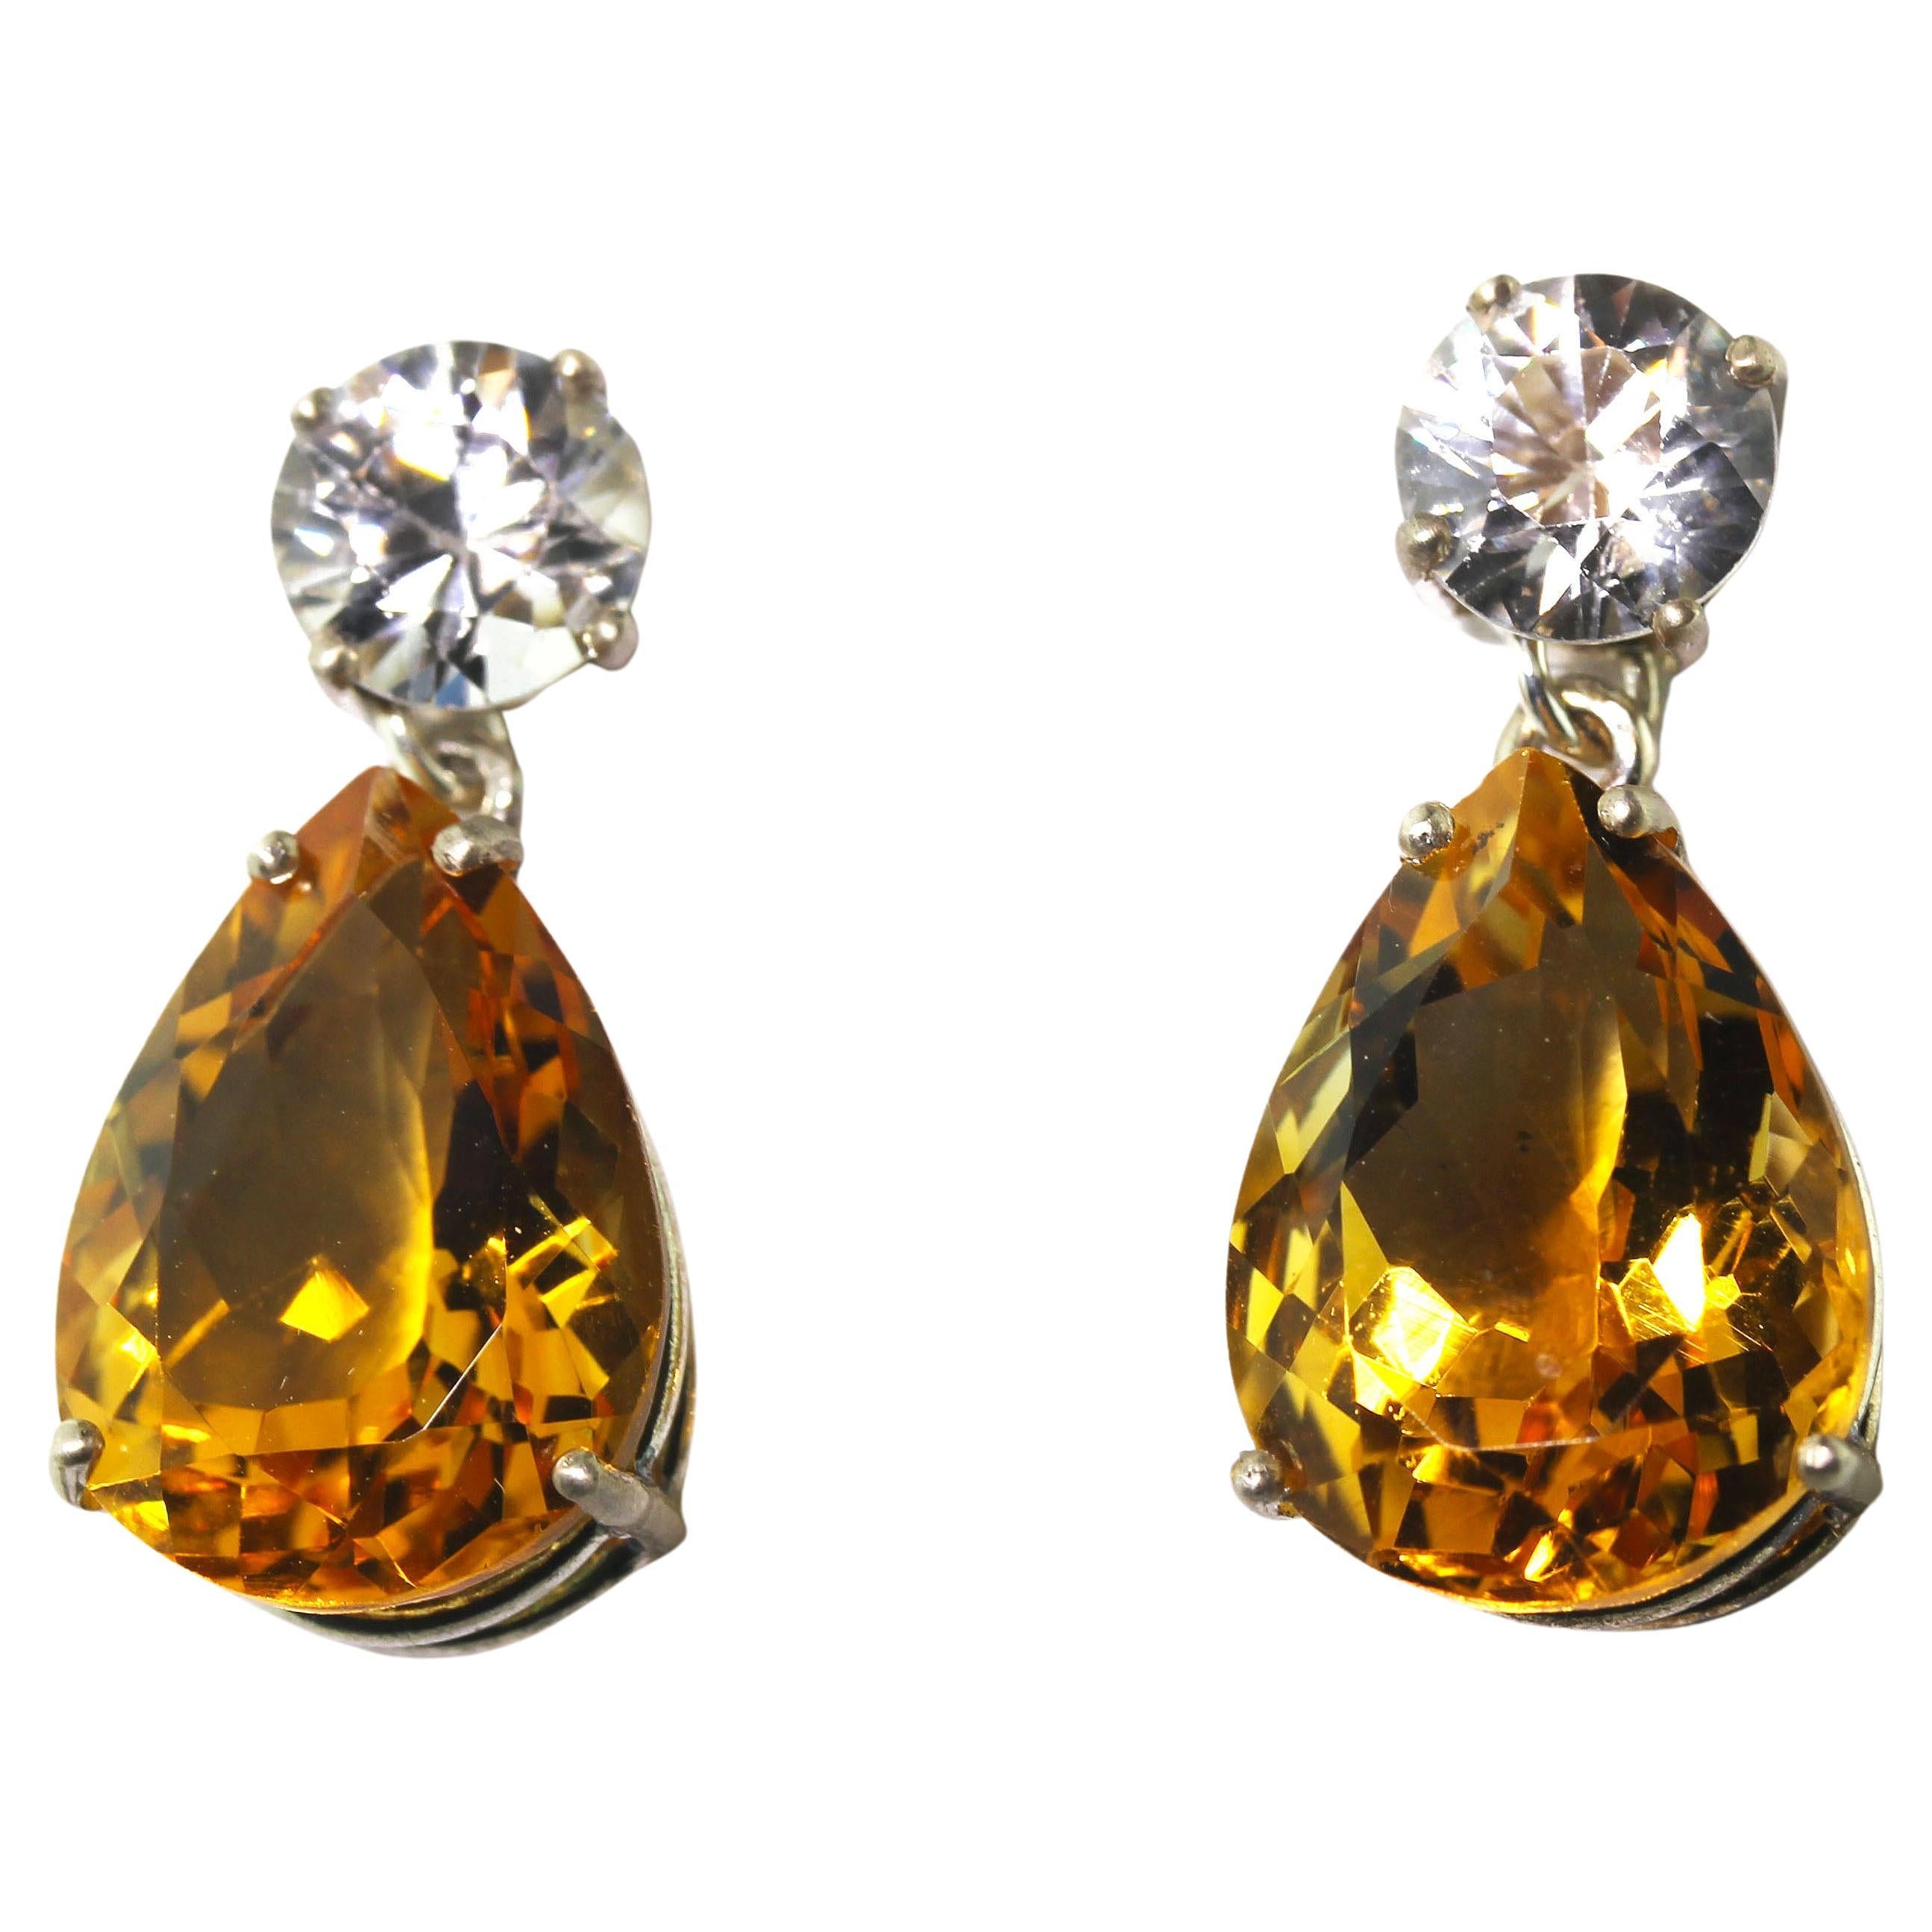 AJD Glittery 3.66Ct Natural Zircon & 15.4Cts Golden Citrine Earrings For Sale